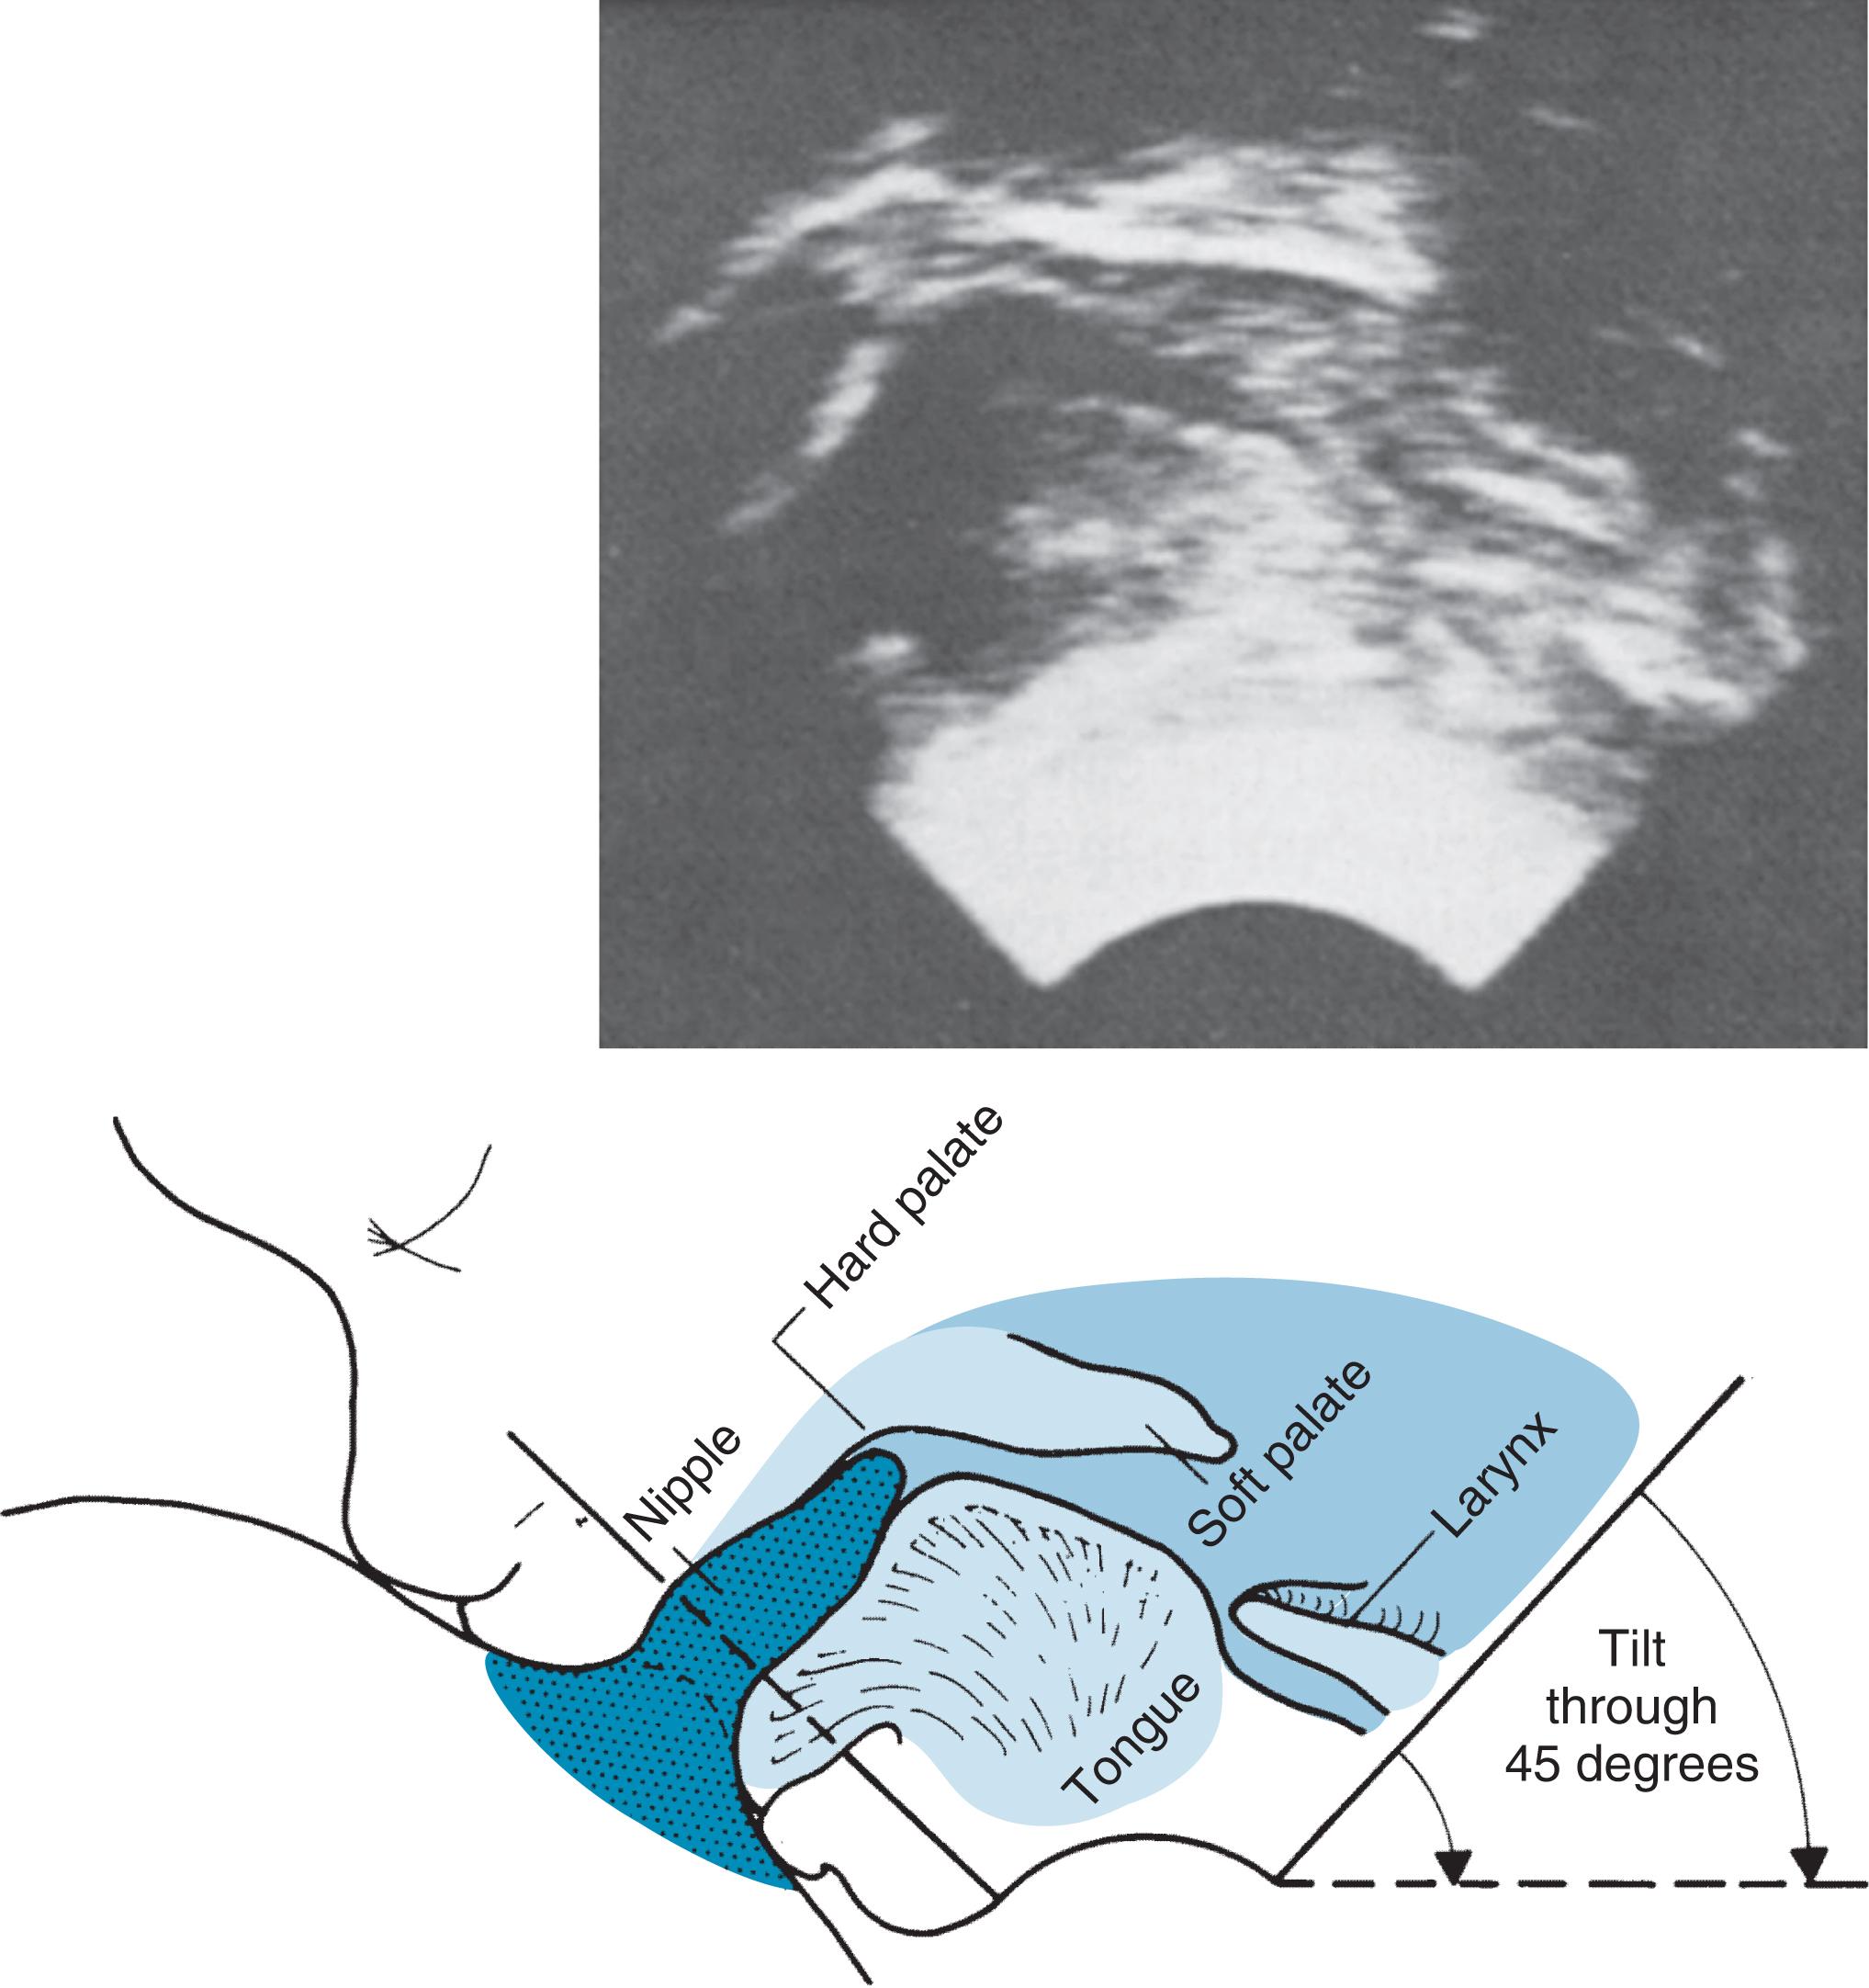 Fig. 3.10, Ultrasound of infant at breast. Still picture of ultrasound scan frame from video recording. The scanner head is at the bottom, with a sector view of 90 degrees. Below is an artist’s impression of the image showing key features. The image is seen best when tilted through 45 degrees so that the infant’s head is vertical. The picture corresponds to the point in the sucking cycle when the maximum point of compression of the nipple by the tongue has almost reached the tip of the nipple. Once the nipple has become fully expanded, a fresh cycle of compression will be initiated at the base of the nipple and will then move back.